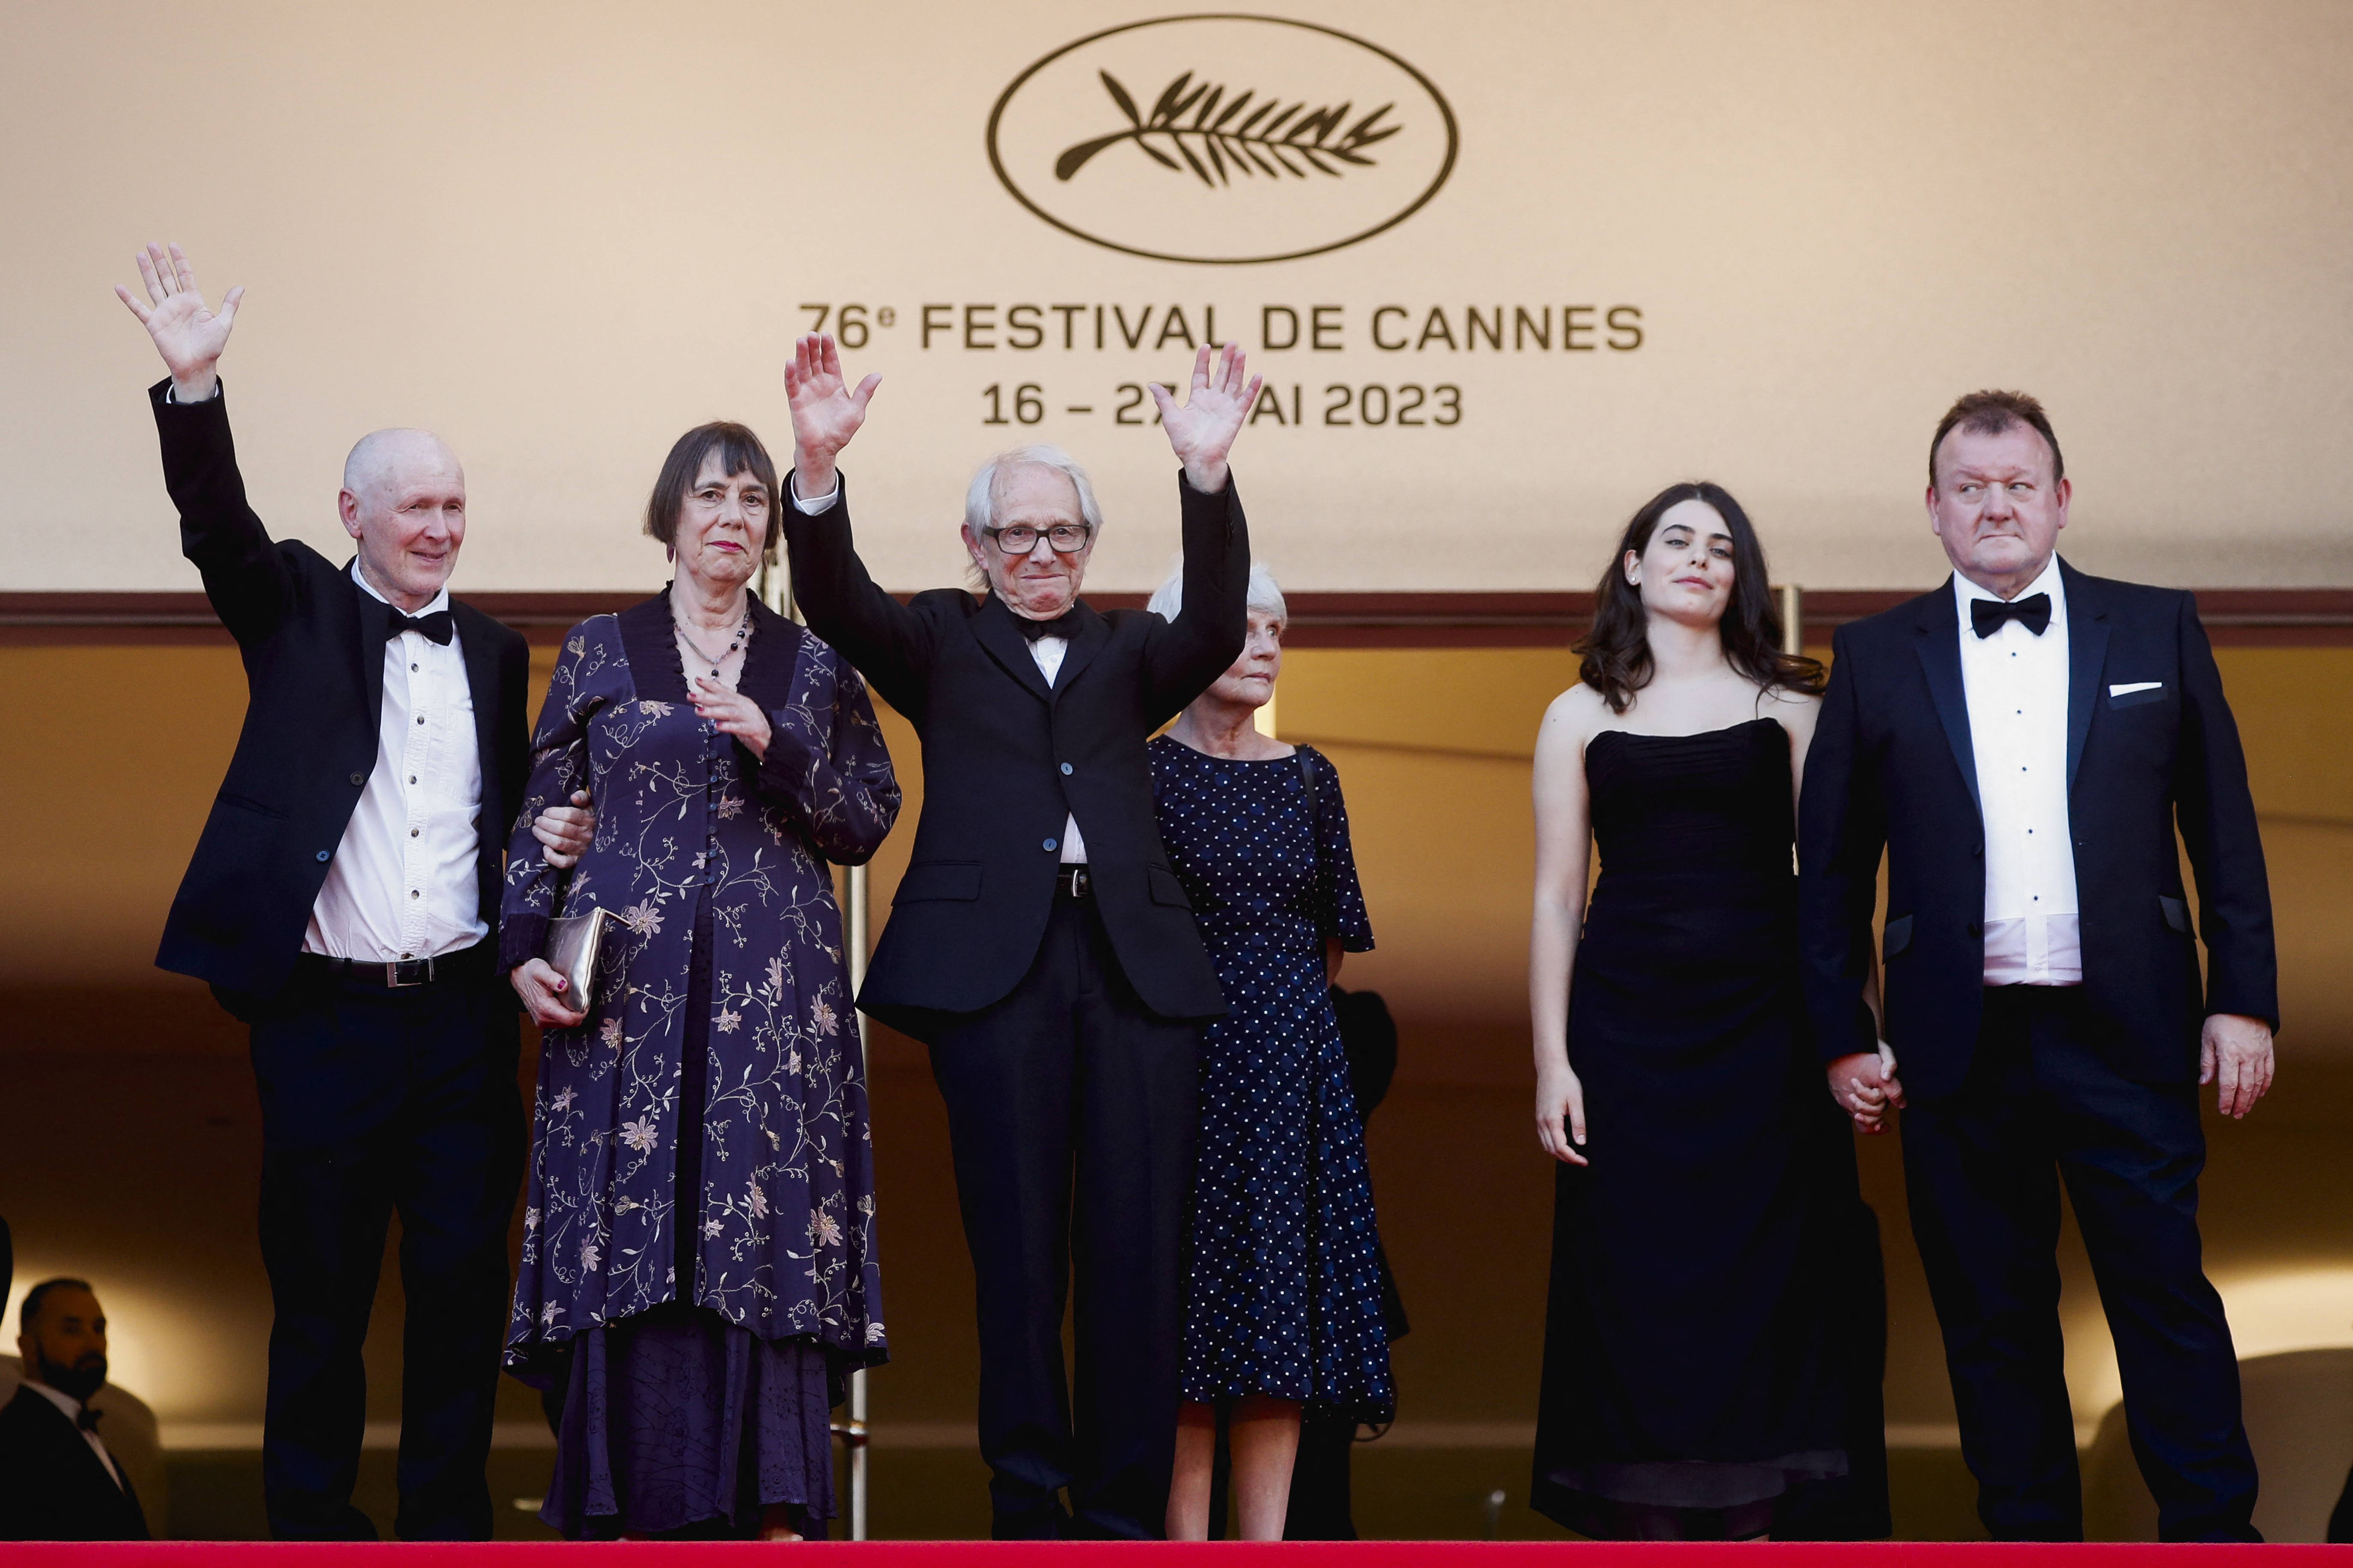 The 76th Cannes Film Festival - Screening of the film "The Old Oak" in competition - Red Carpet Arrivals